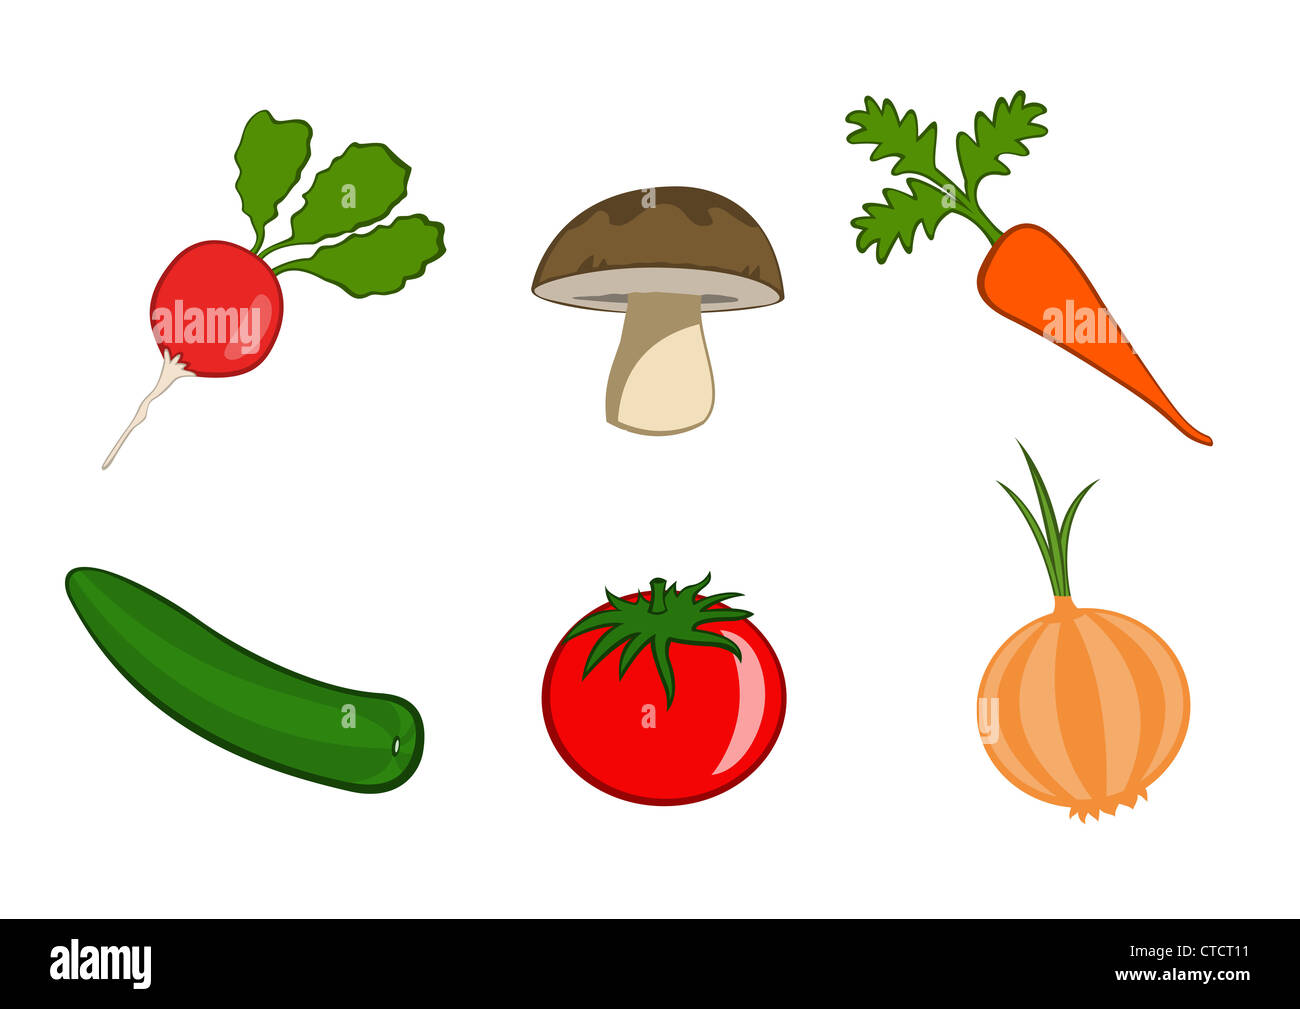 Vector illustration of funny, cute vegetable icons. Includes radish,  mushroom, carrot, cucumber, tomato and onion Stock Photo - Alamy